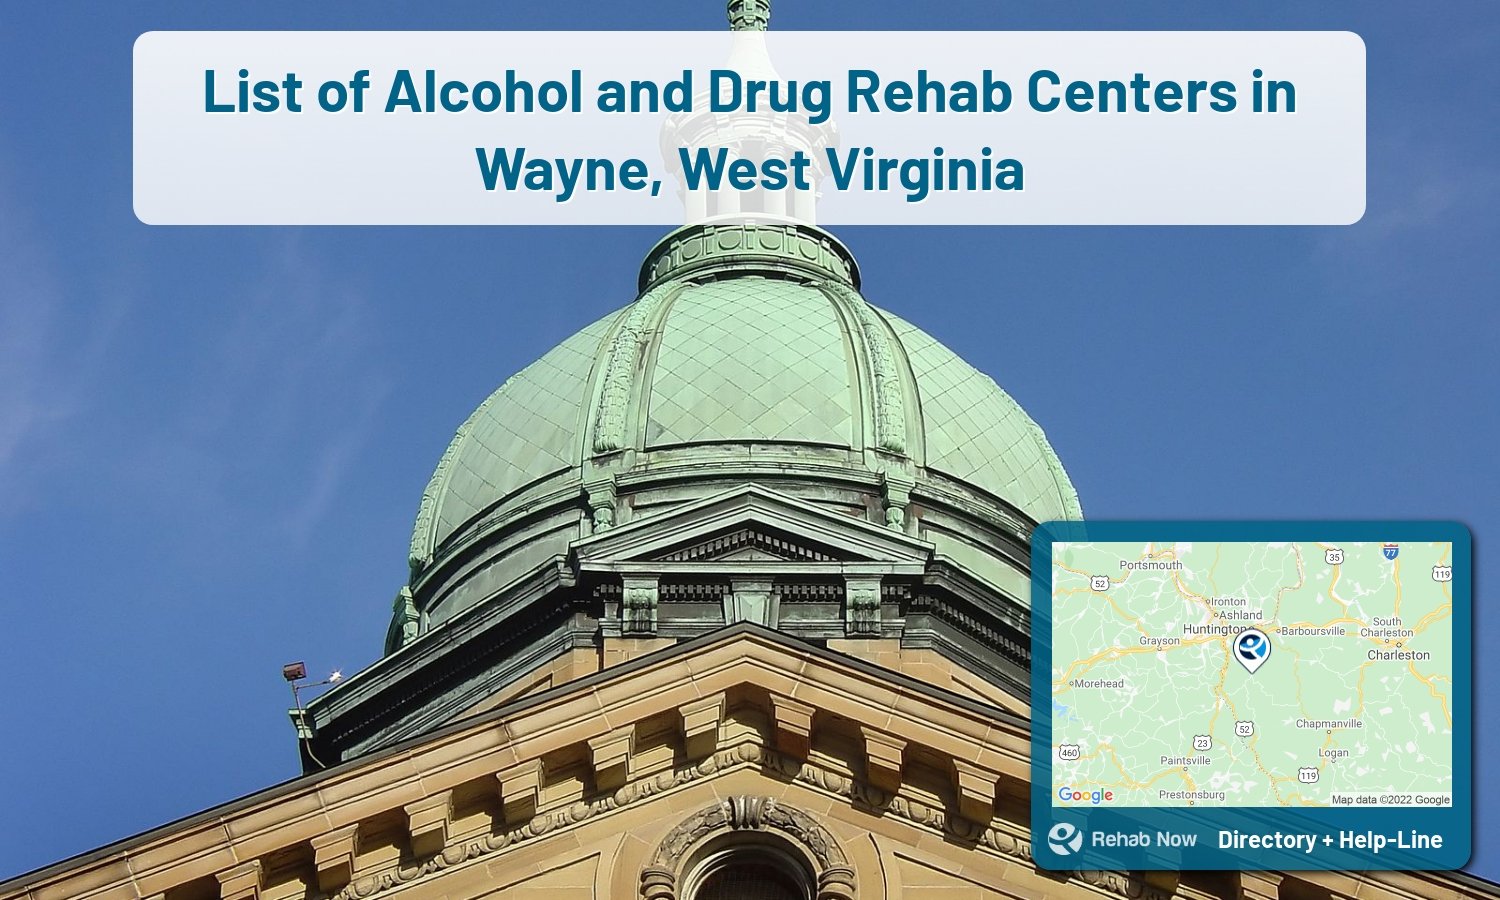 Wayne, WV Treatment Centers. Find drug rehab in Wayne, West Virginia, or detox and treatment programs. Get the right help now!